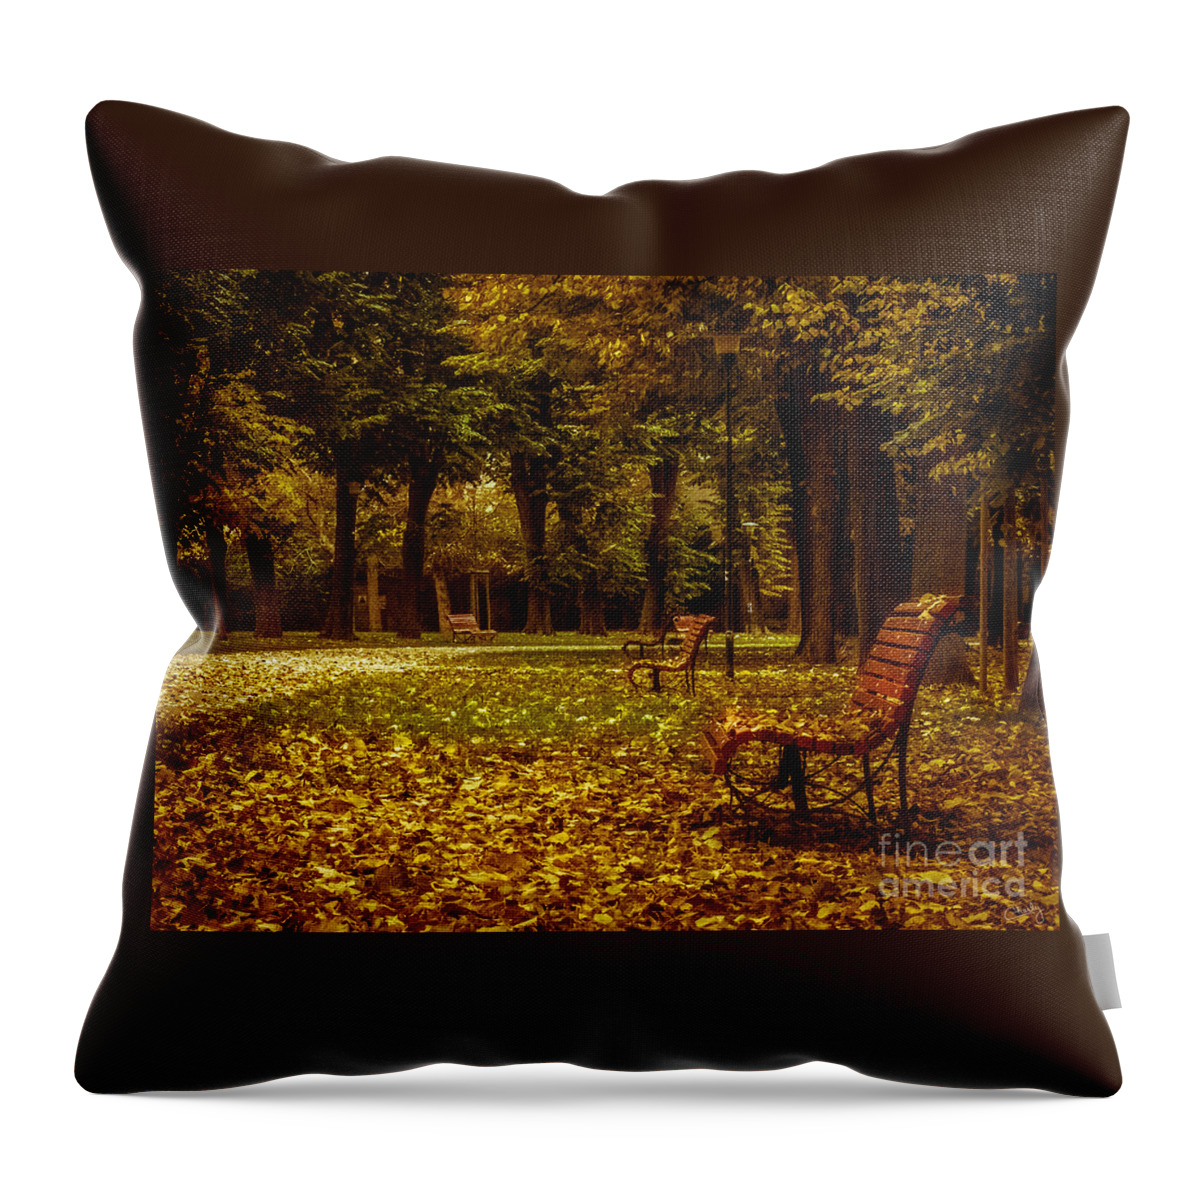 Autumn Park Throw Pillow featuring the photograph Autumn Park by Prints of Italy